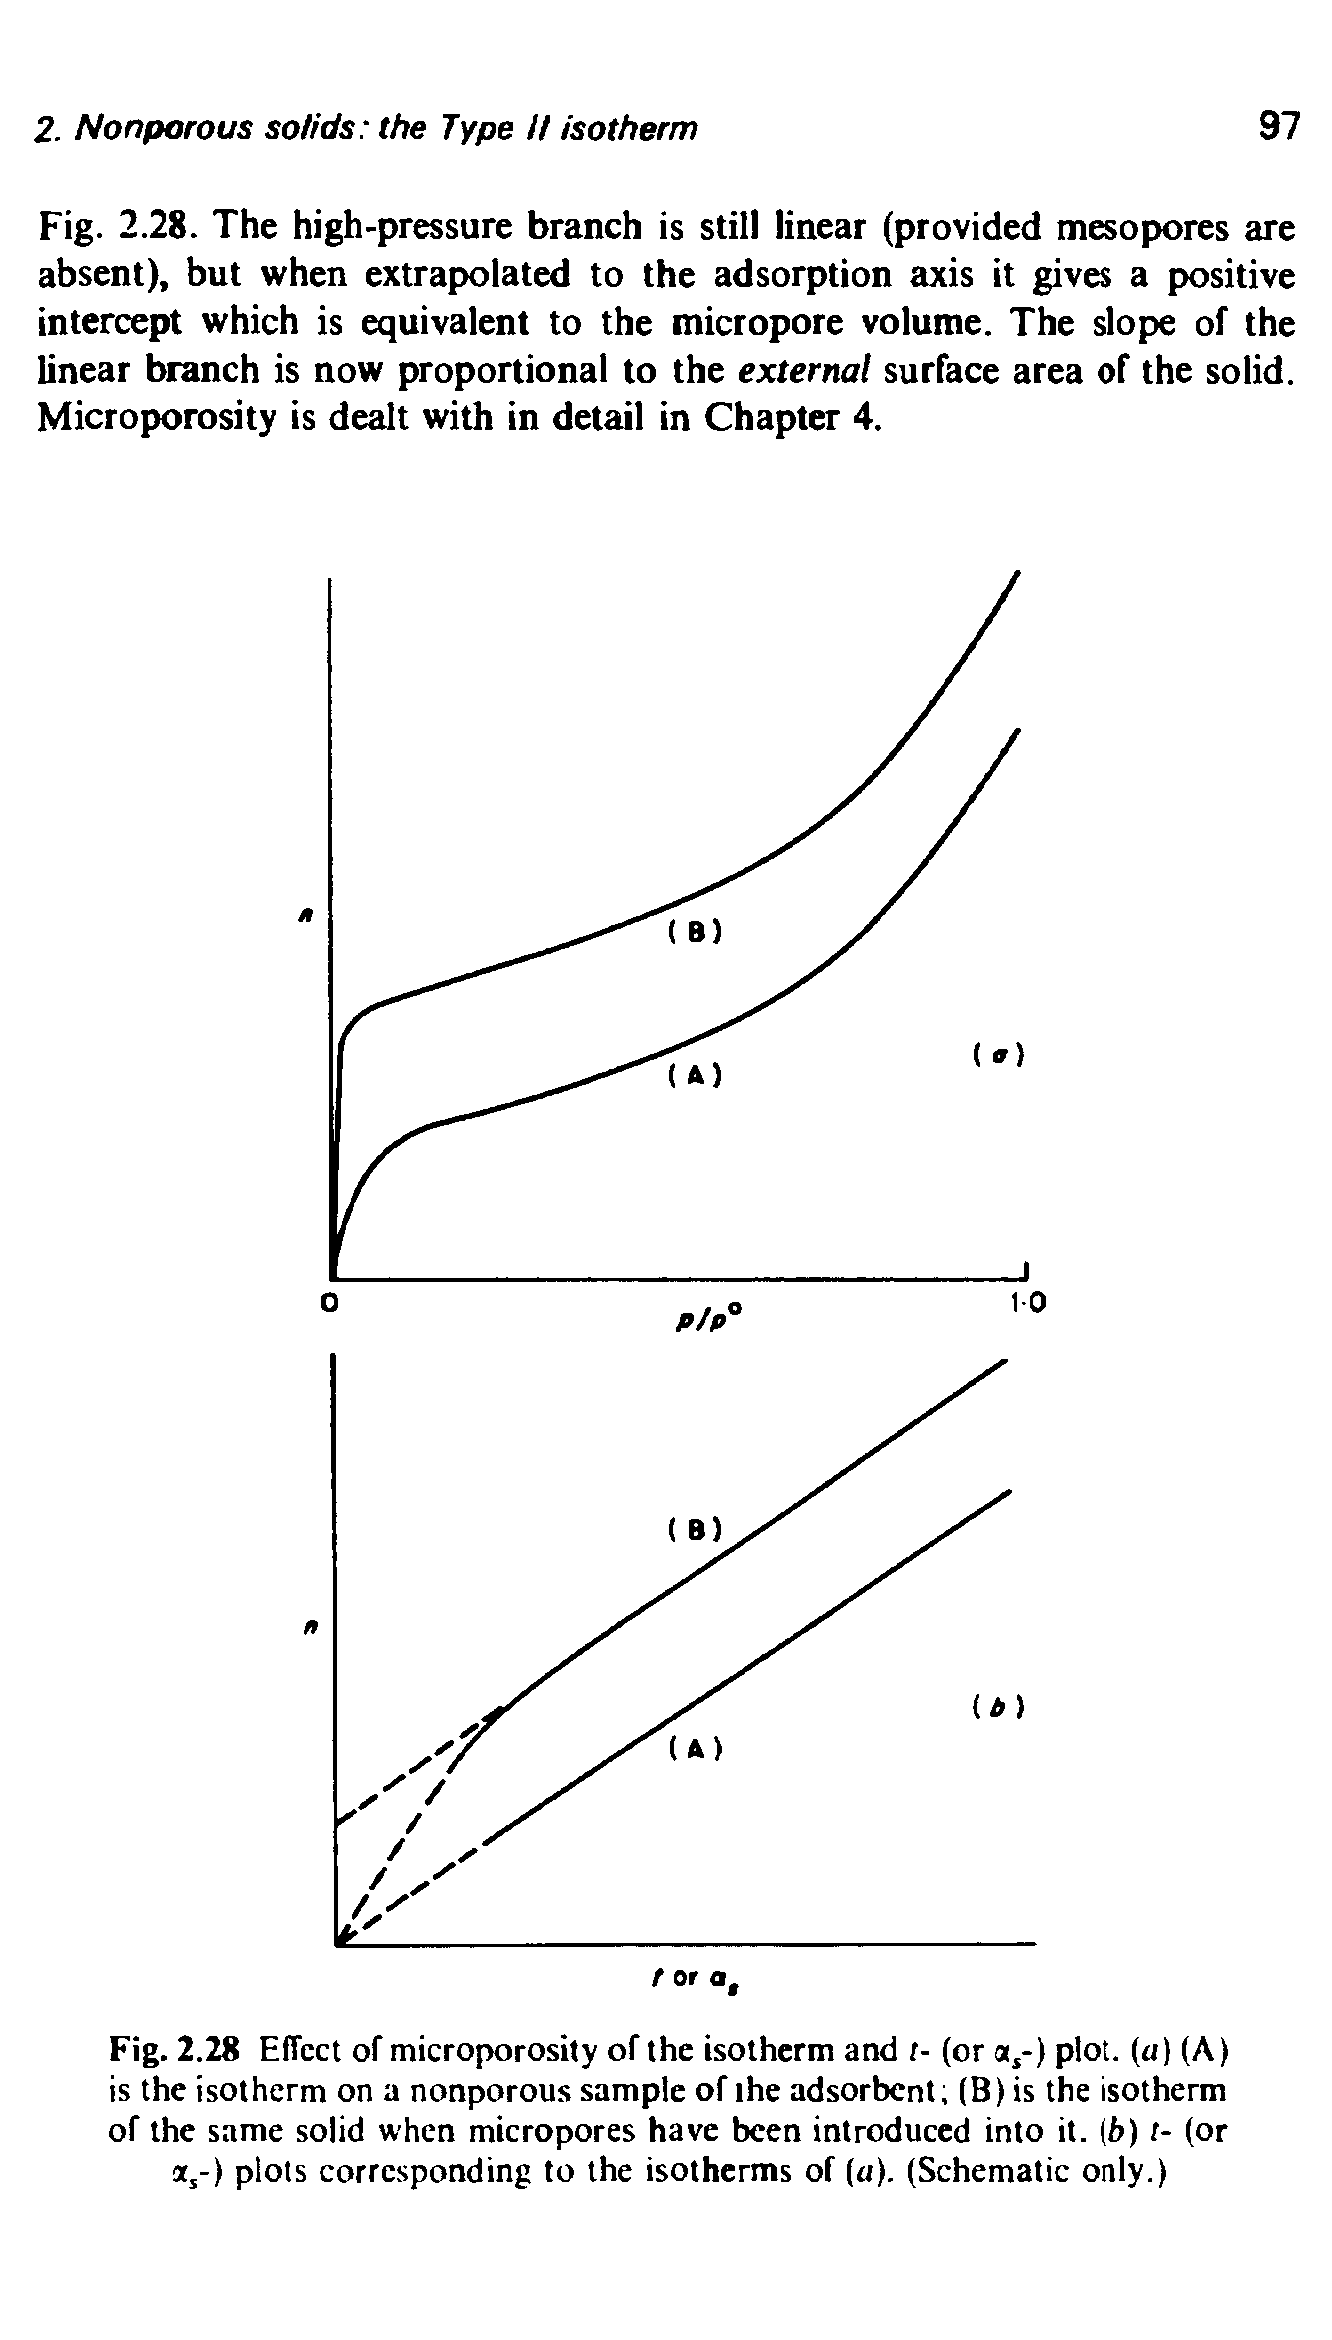 Fig. 2.28. The high-pressure branch is still linear (provided mesopores are absent), but when extrapolated to the adsorption axis it gives a positive intercept which is equivalent to the micropore volume. The slope of the linear branch is now proportional to the external surface area of the solid. Microporosity is dealt with in detail in Chapter 4.